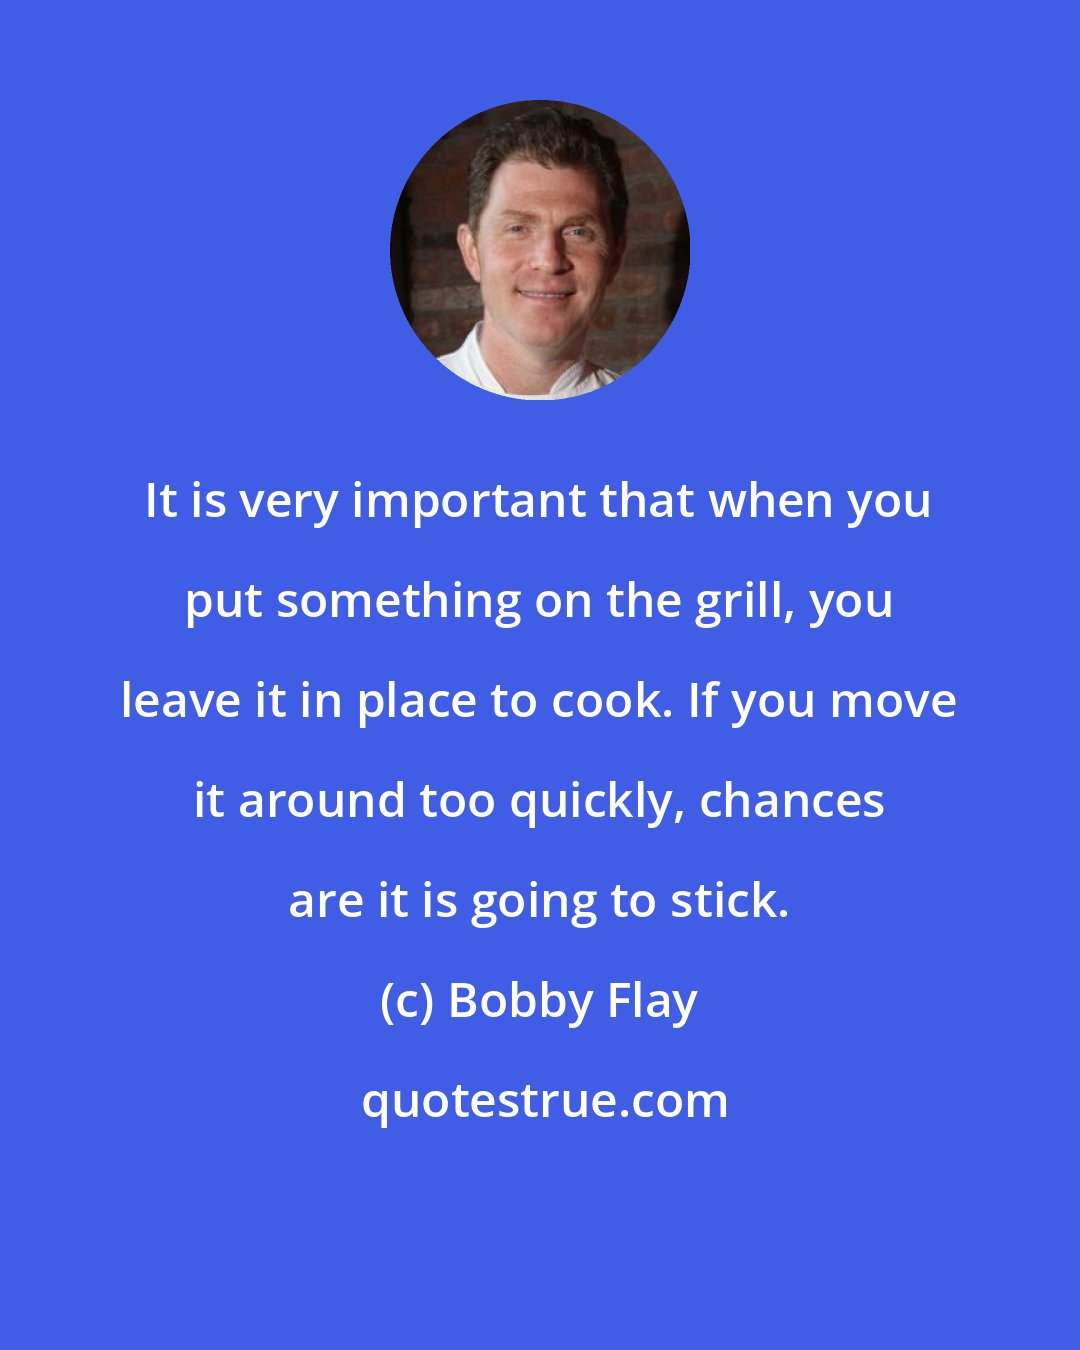 Bobby Flay: It is very important that when you put something on the grill, you leave it in place to cook. If you move it around too quickly, chances are it is going to stick.